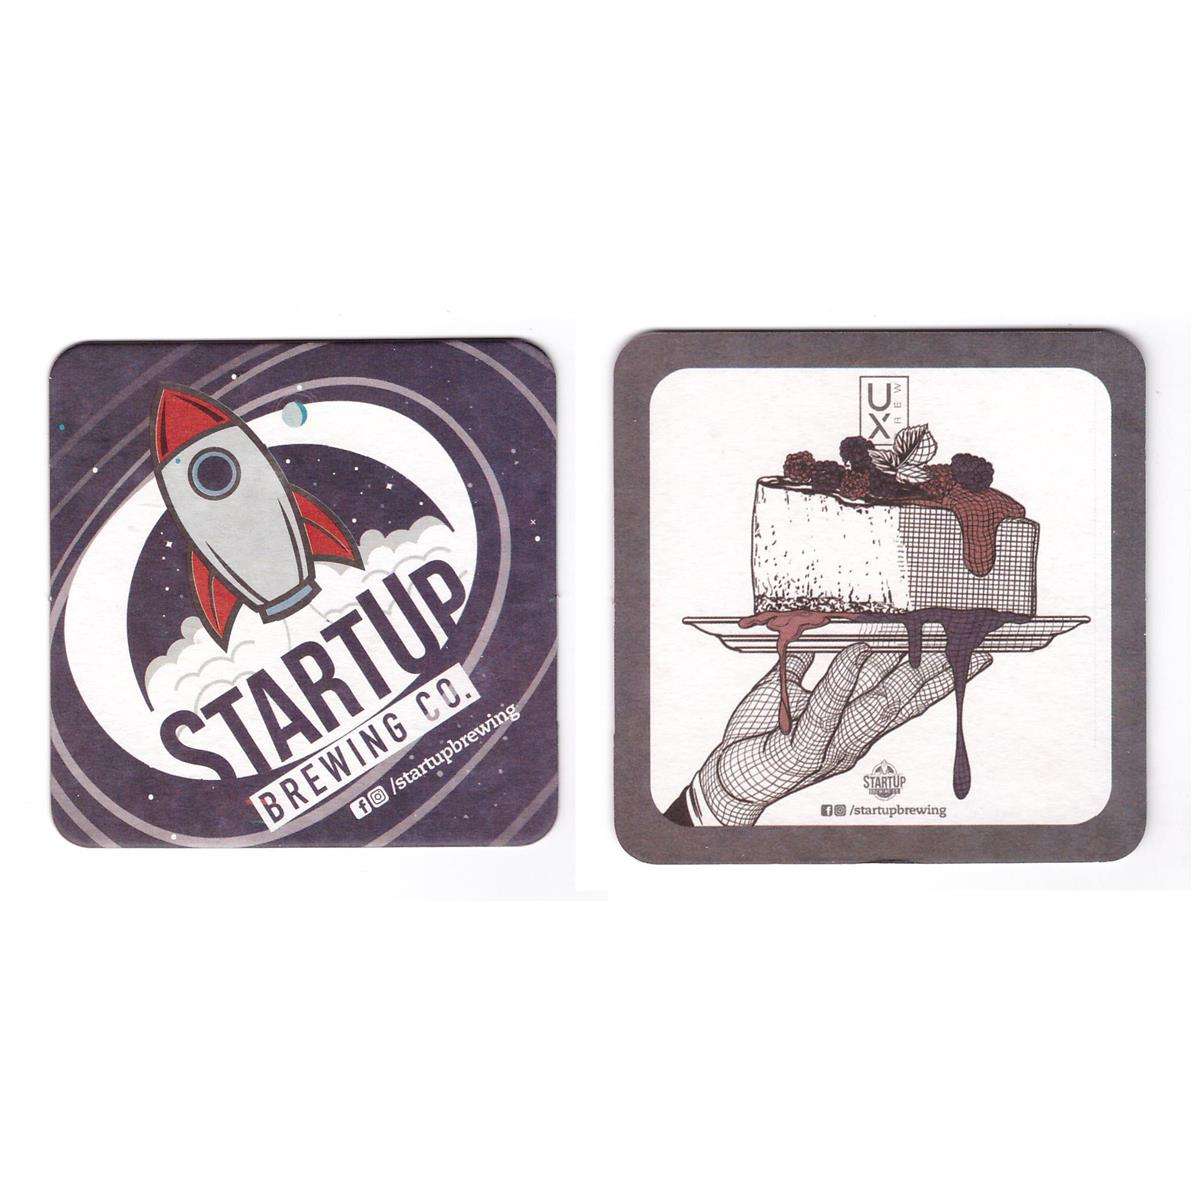 StartUp Brewing CO